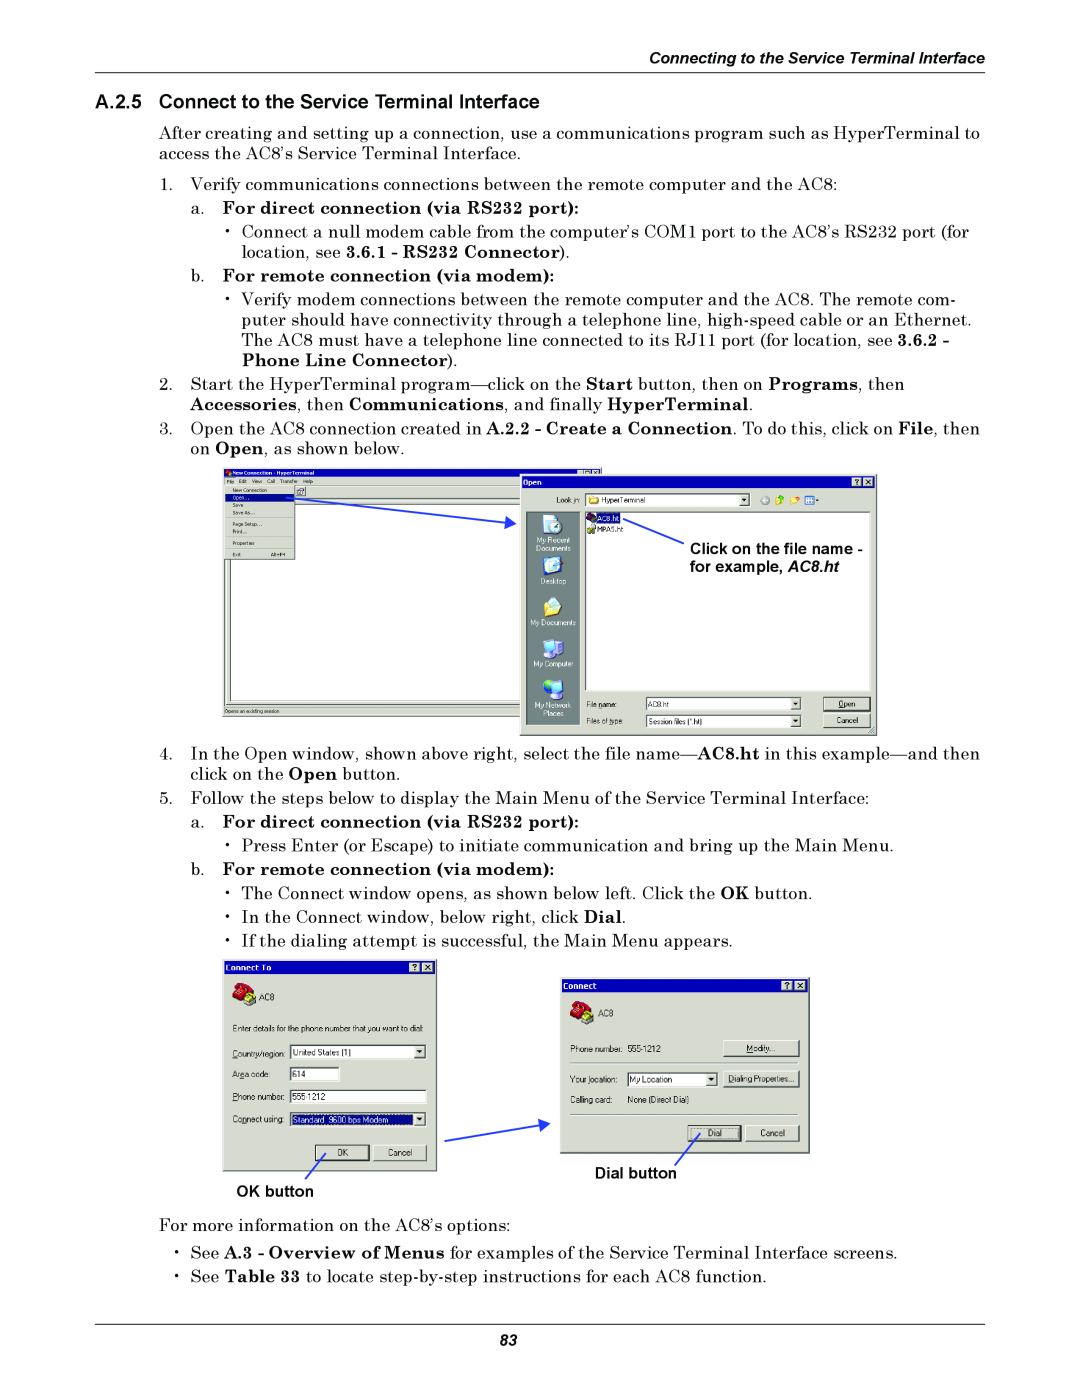 Emerson AC8 user manual A.2.5 Connect to the Service Terminal Interface, a.For direct connection via RS232 port 